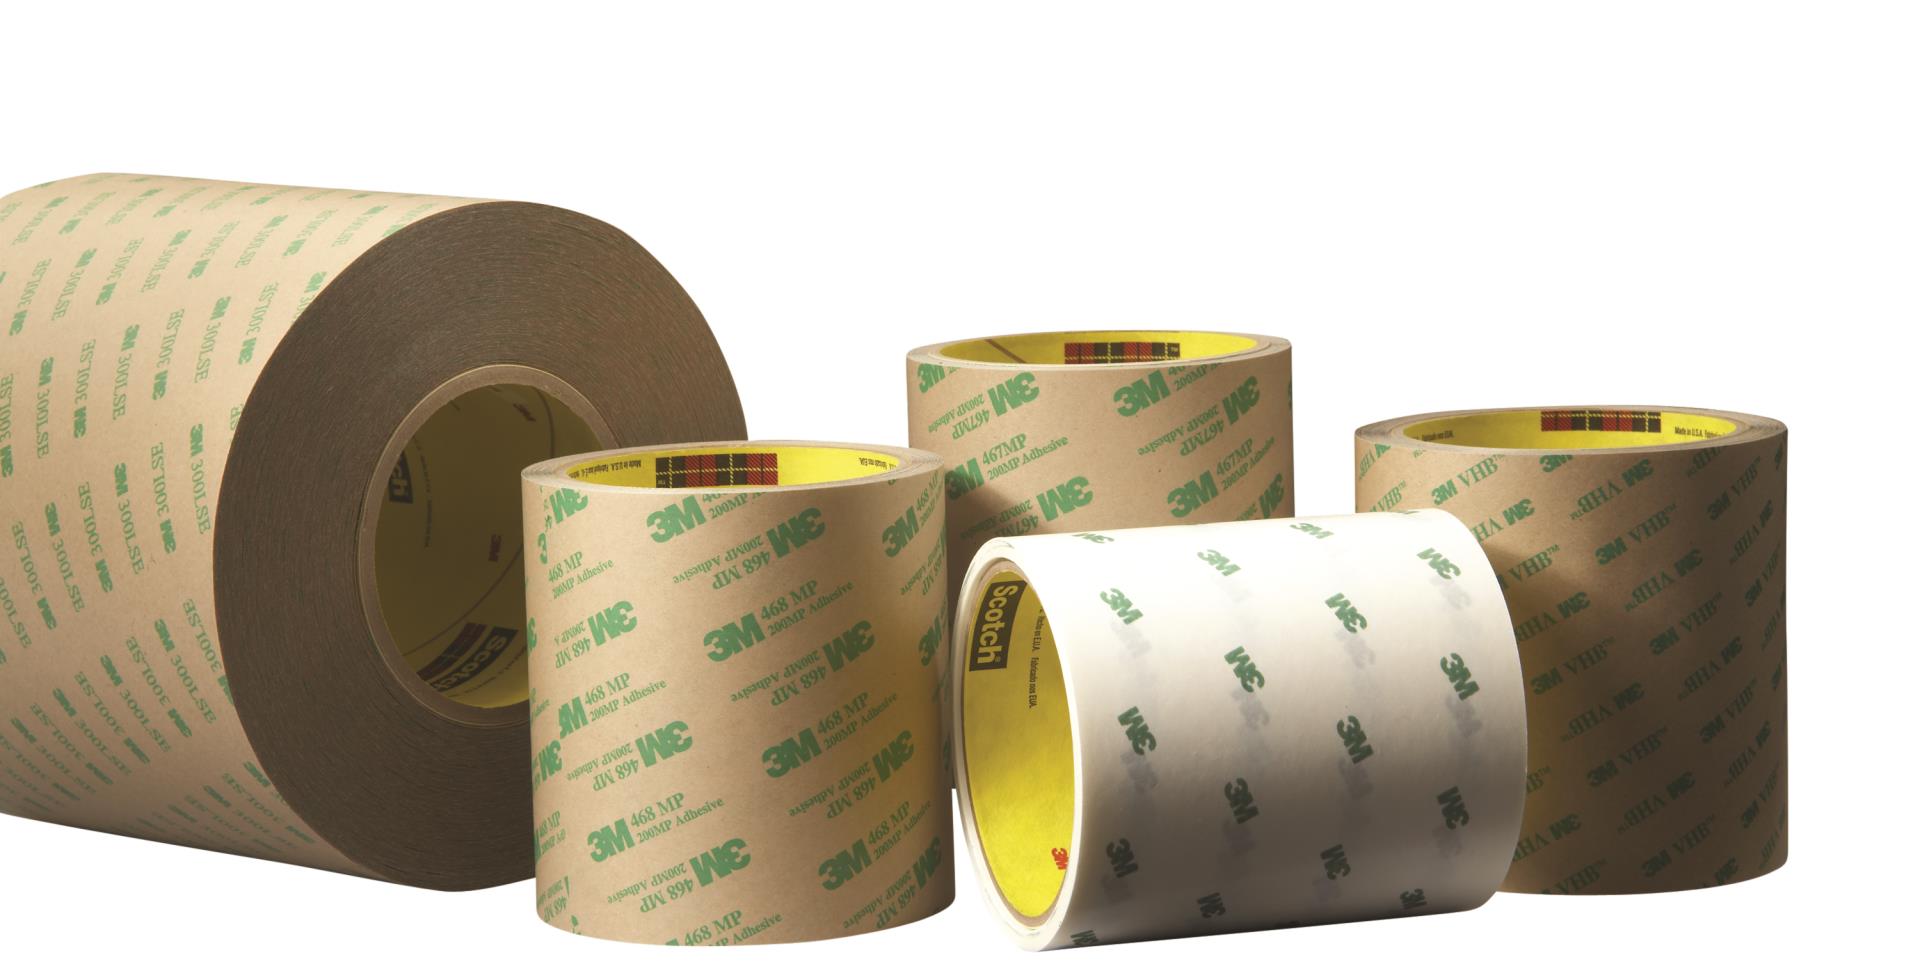 3M Double Coated Tape Extend Liner 476XL Translucent 3/4 in x 60 yd 6.0 mil 1 ea 